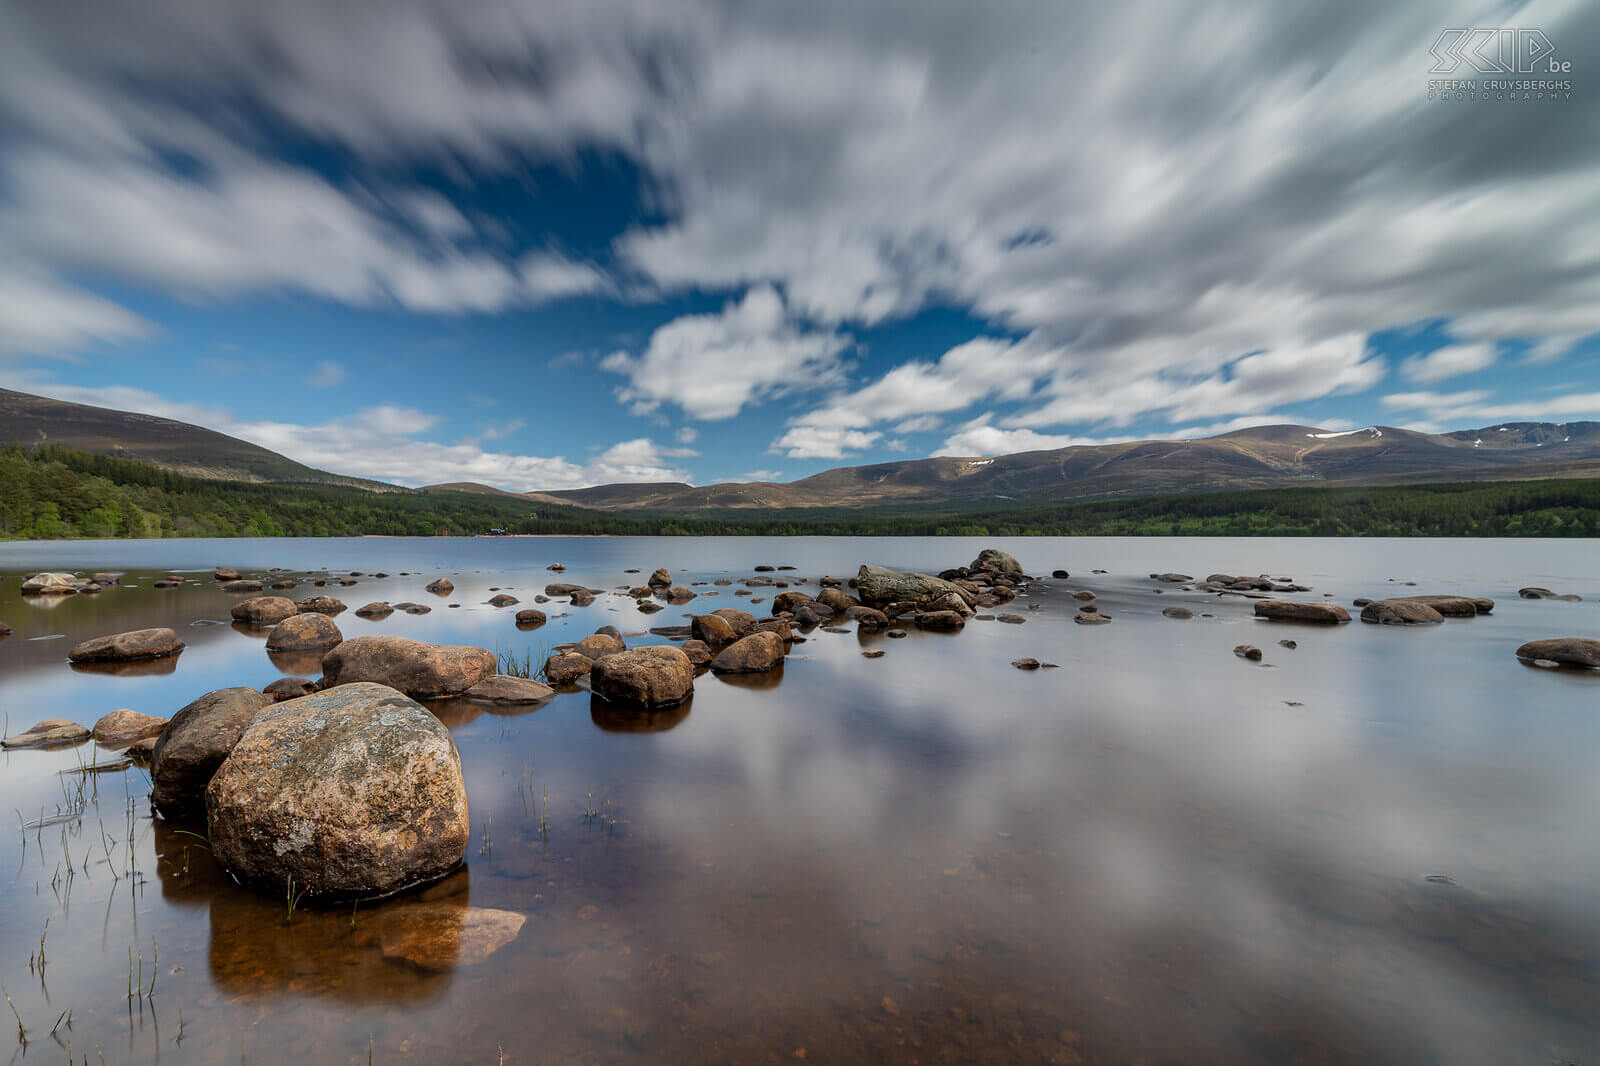 Glenmore Forest Park - Loch Morlich Glenmore Forest Park lies within Cairngorms National Park. It's a great place where you can see old forests and beautiful lochs. Stefan Cruysberghs